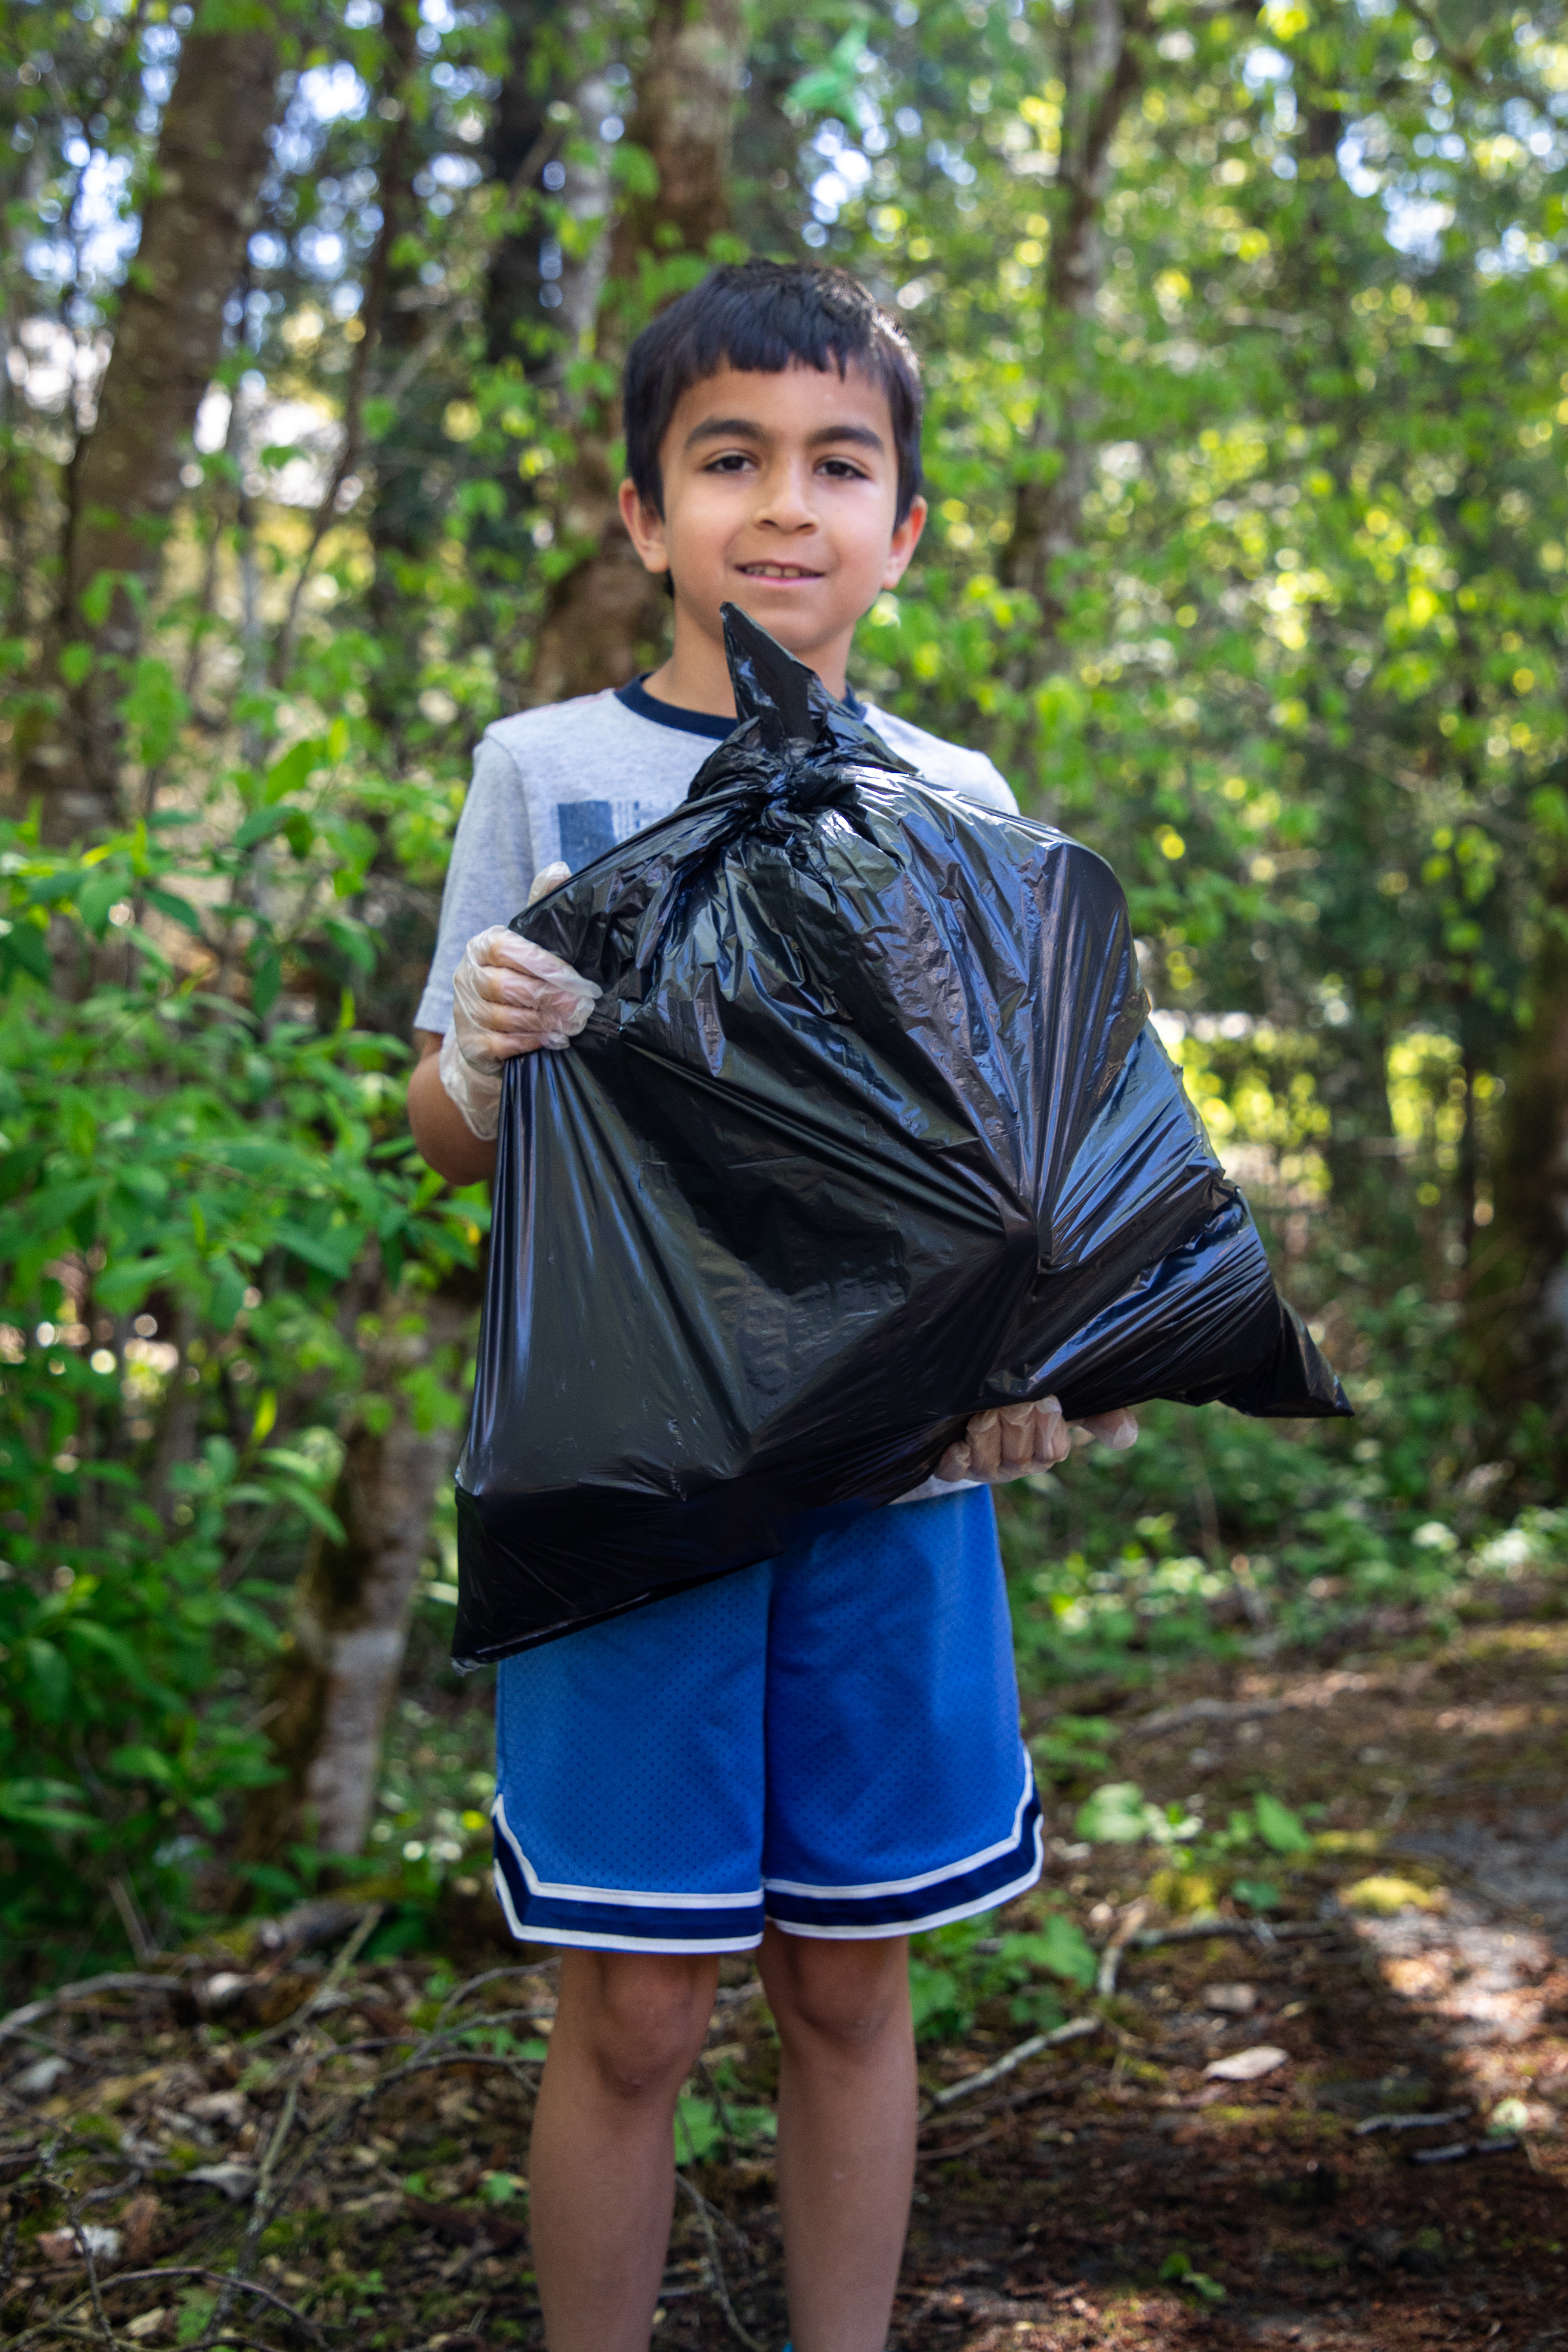 Albion Elementary student holding up full garbage bag after community cleanup.